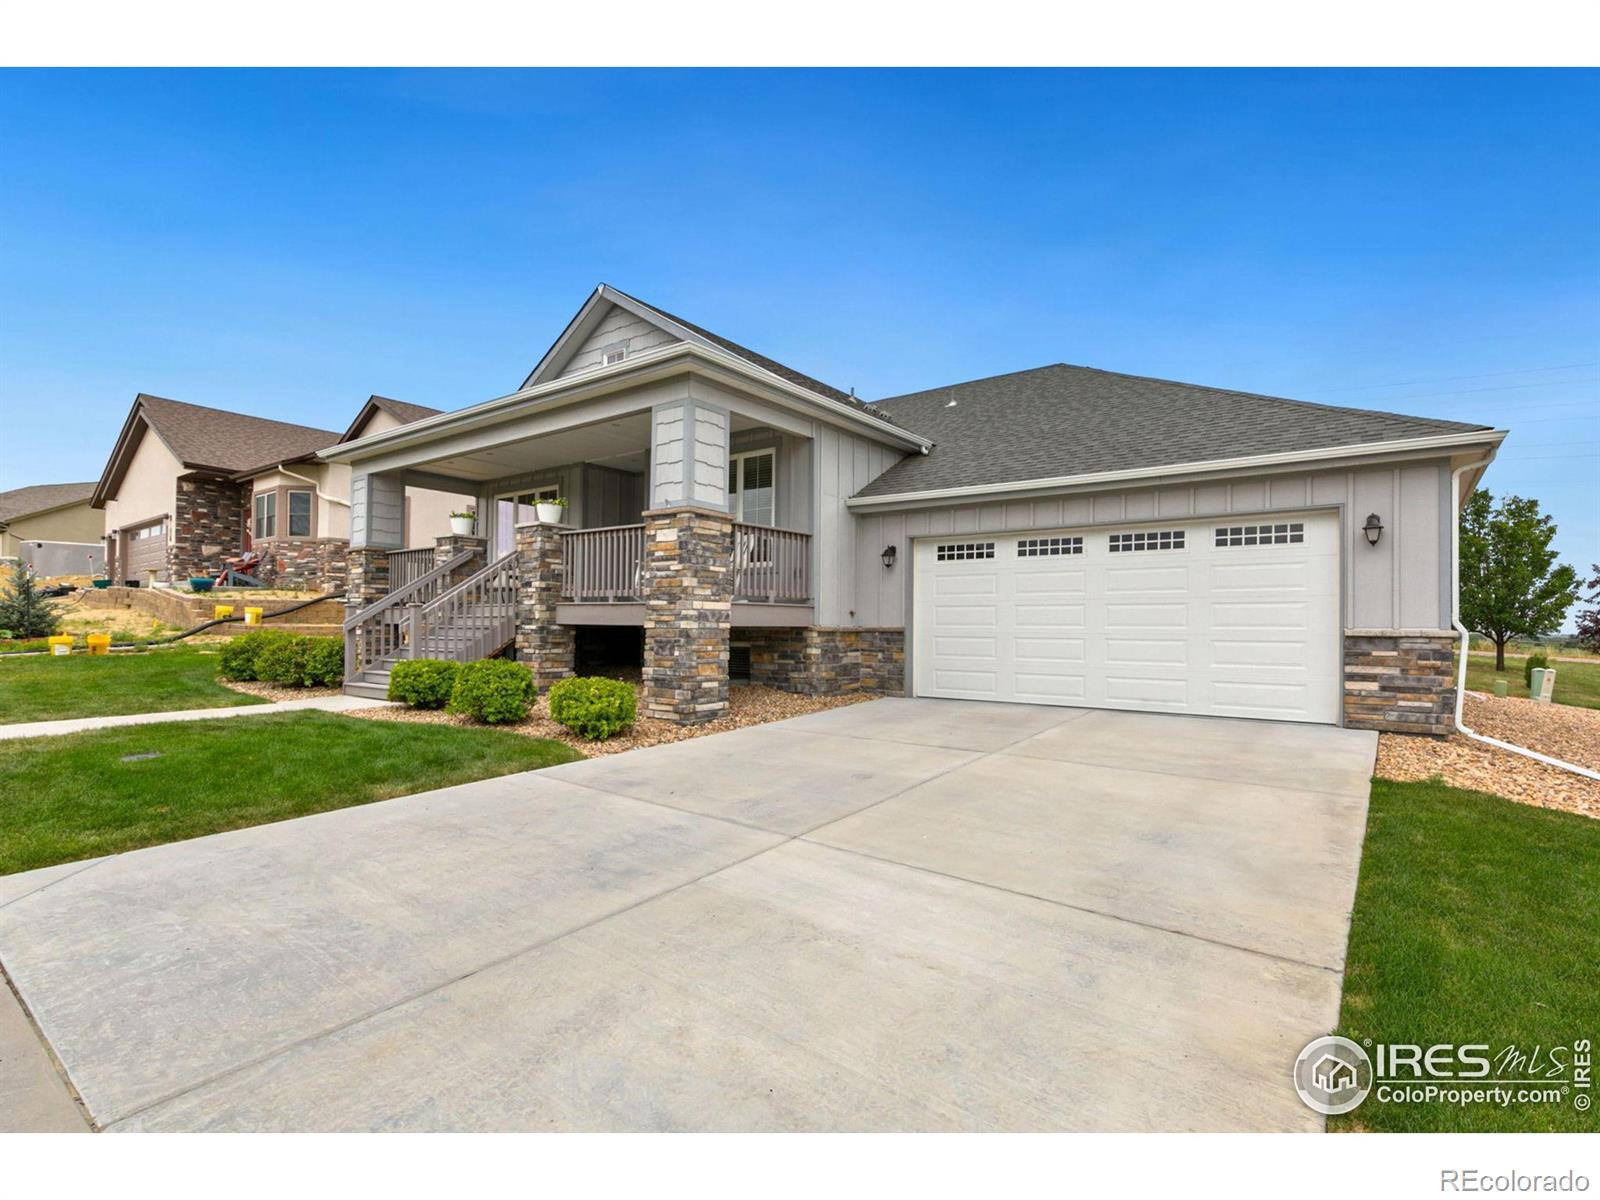 415  Double Tree Drive, greeley MLS: 123456789992646 Beds: 3 Baths: 3 Price: $600,000